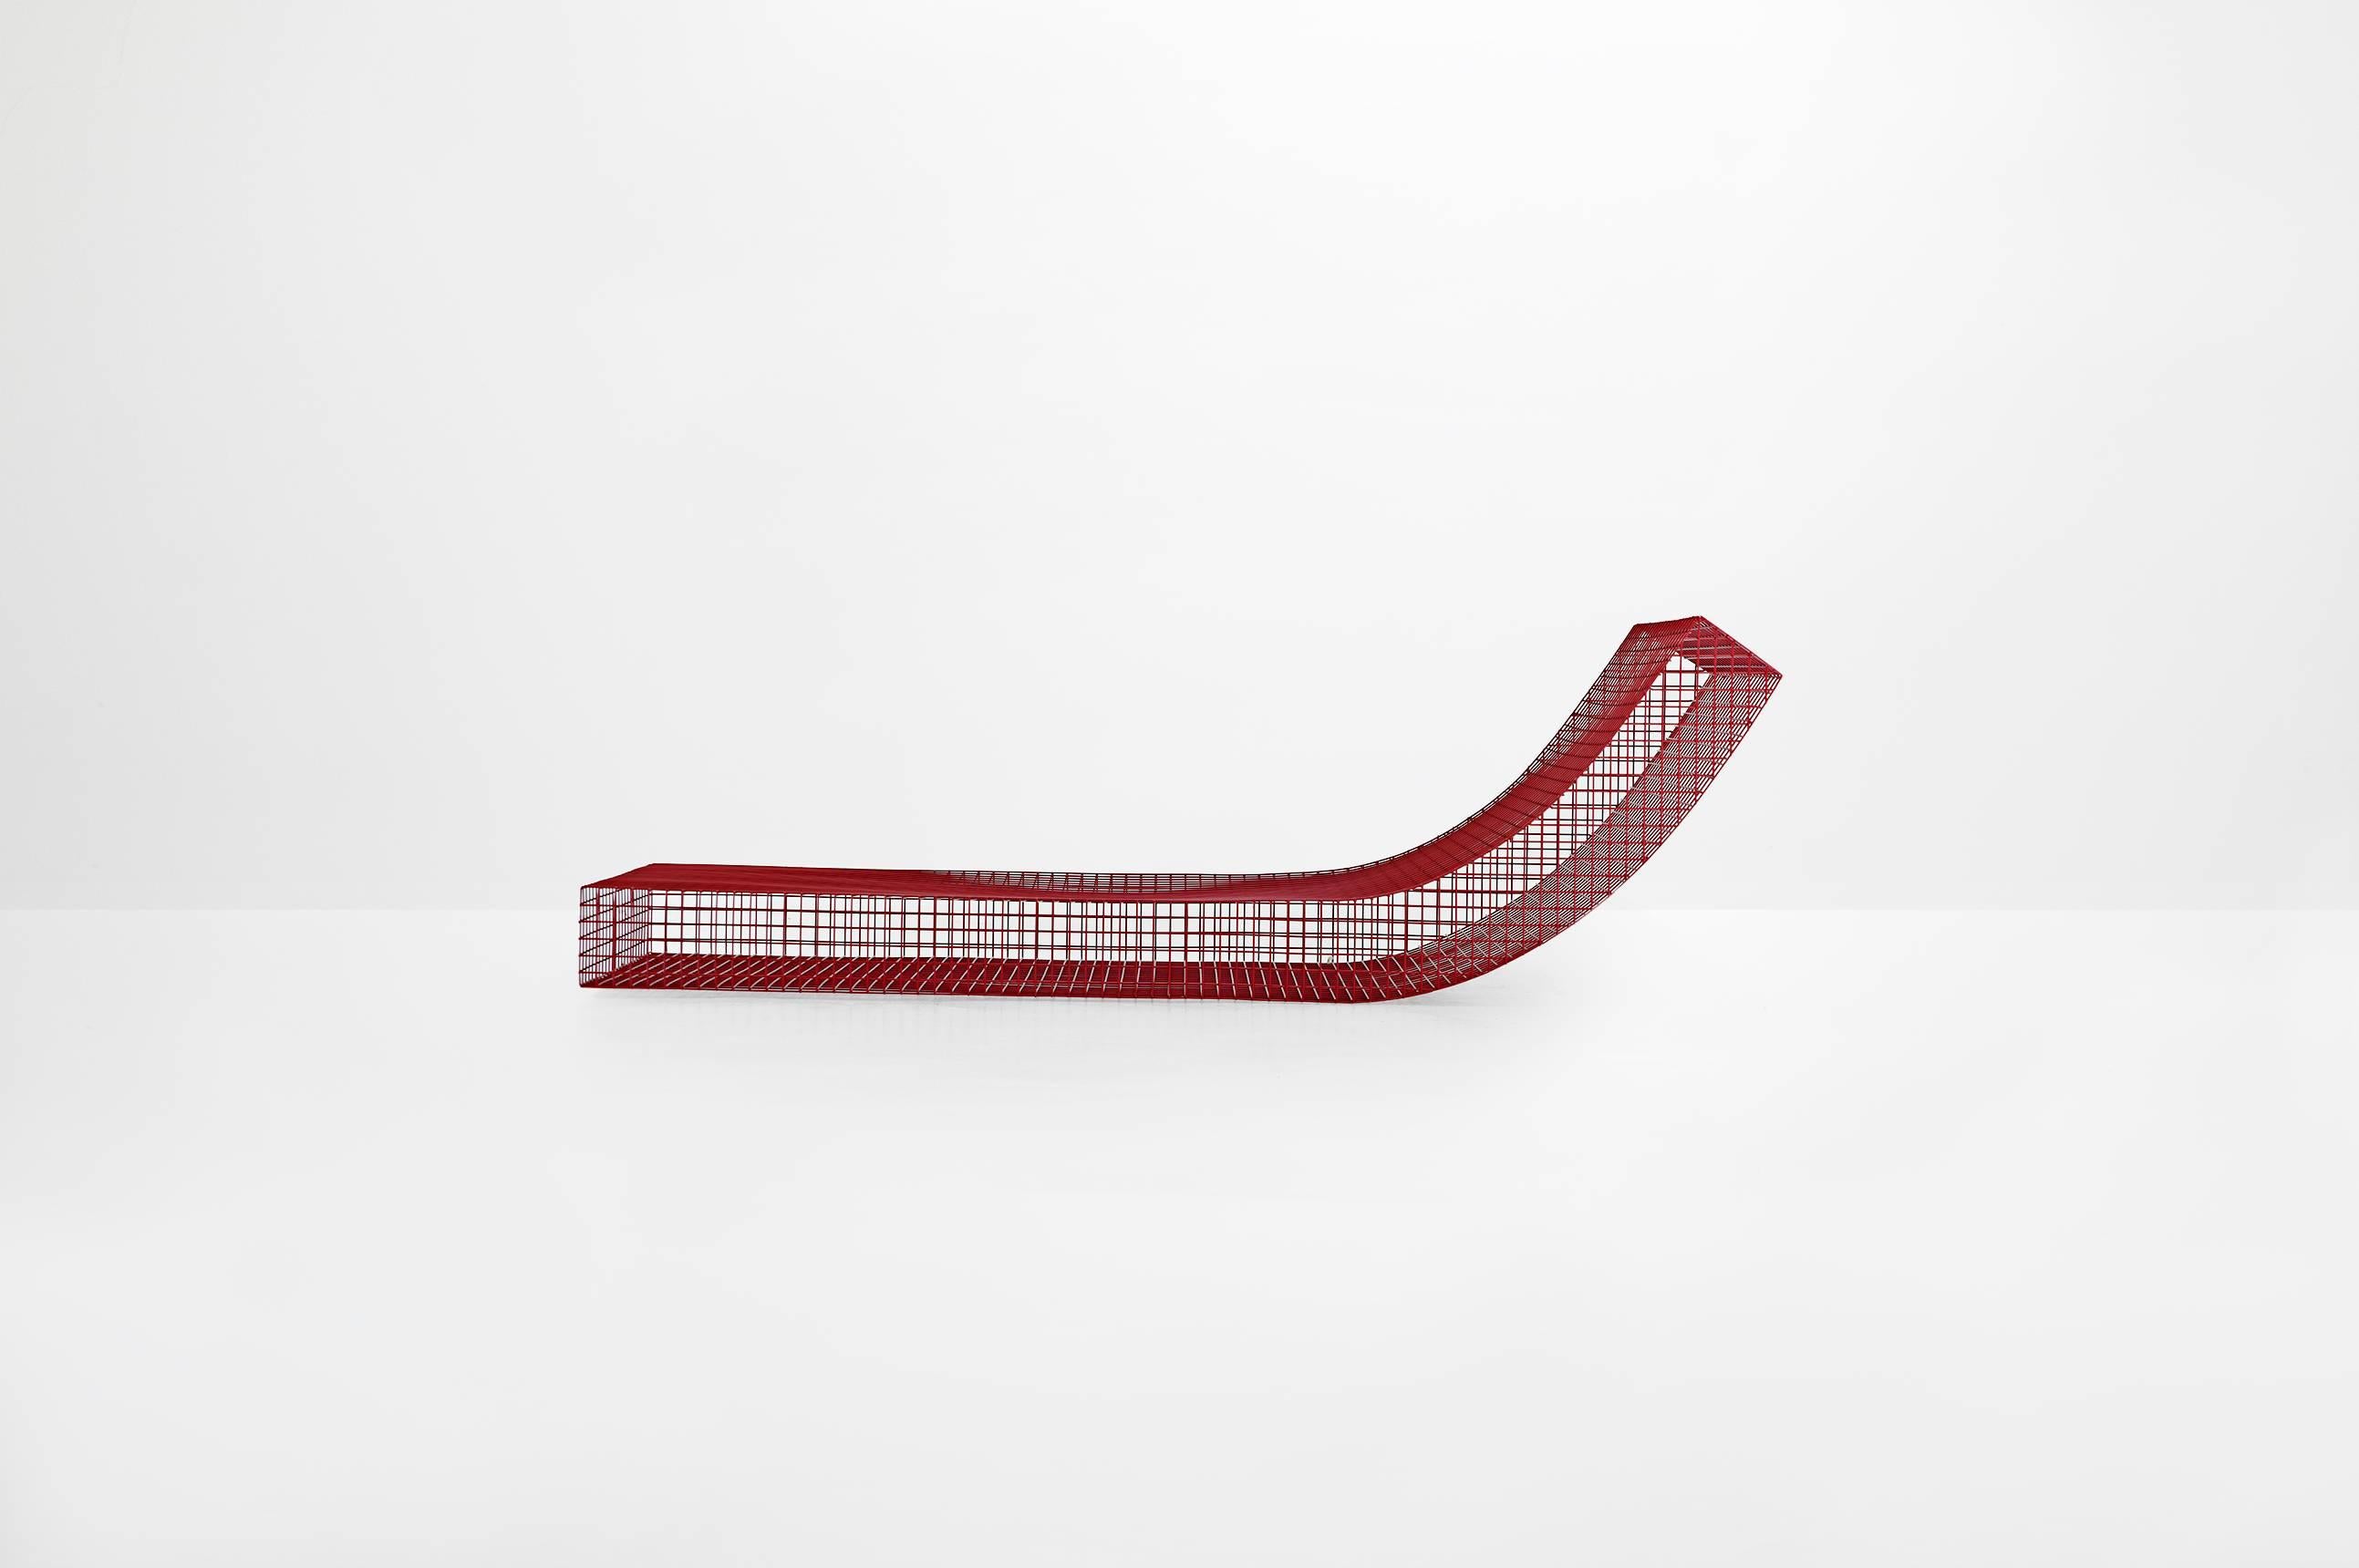 Muller Van Severen

Outdoor lounge chair model “Wire S #5”
Manufactured by Muller Van Severen
Produced for Side Gallery
Powder coated stainless steel in deep red

Measurements
177.5 cm x 60 cm x 51 H cm
69.6 in x 23.6 in x 20 H